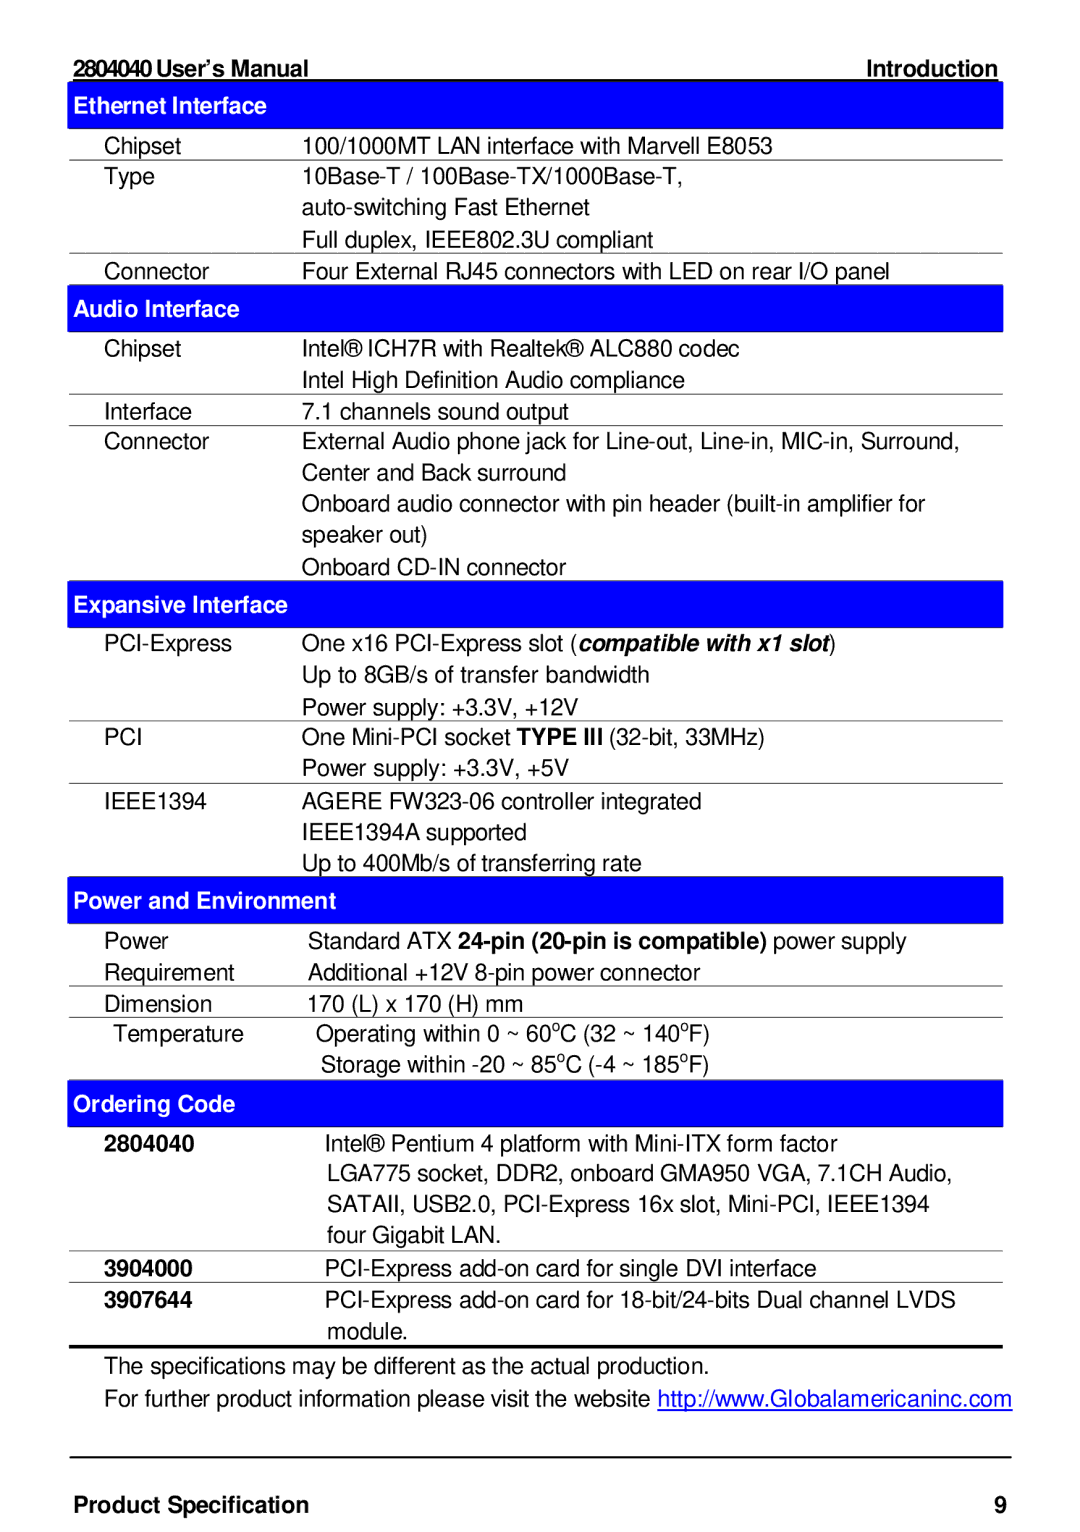 Intel 2804040 user manual Ethernet Interface, Audio Interface, Expansive Interface, Power and Environment, Ordering Code 